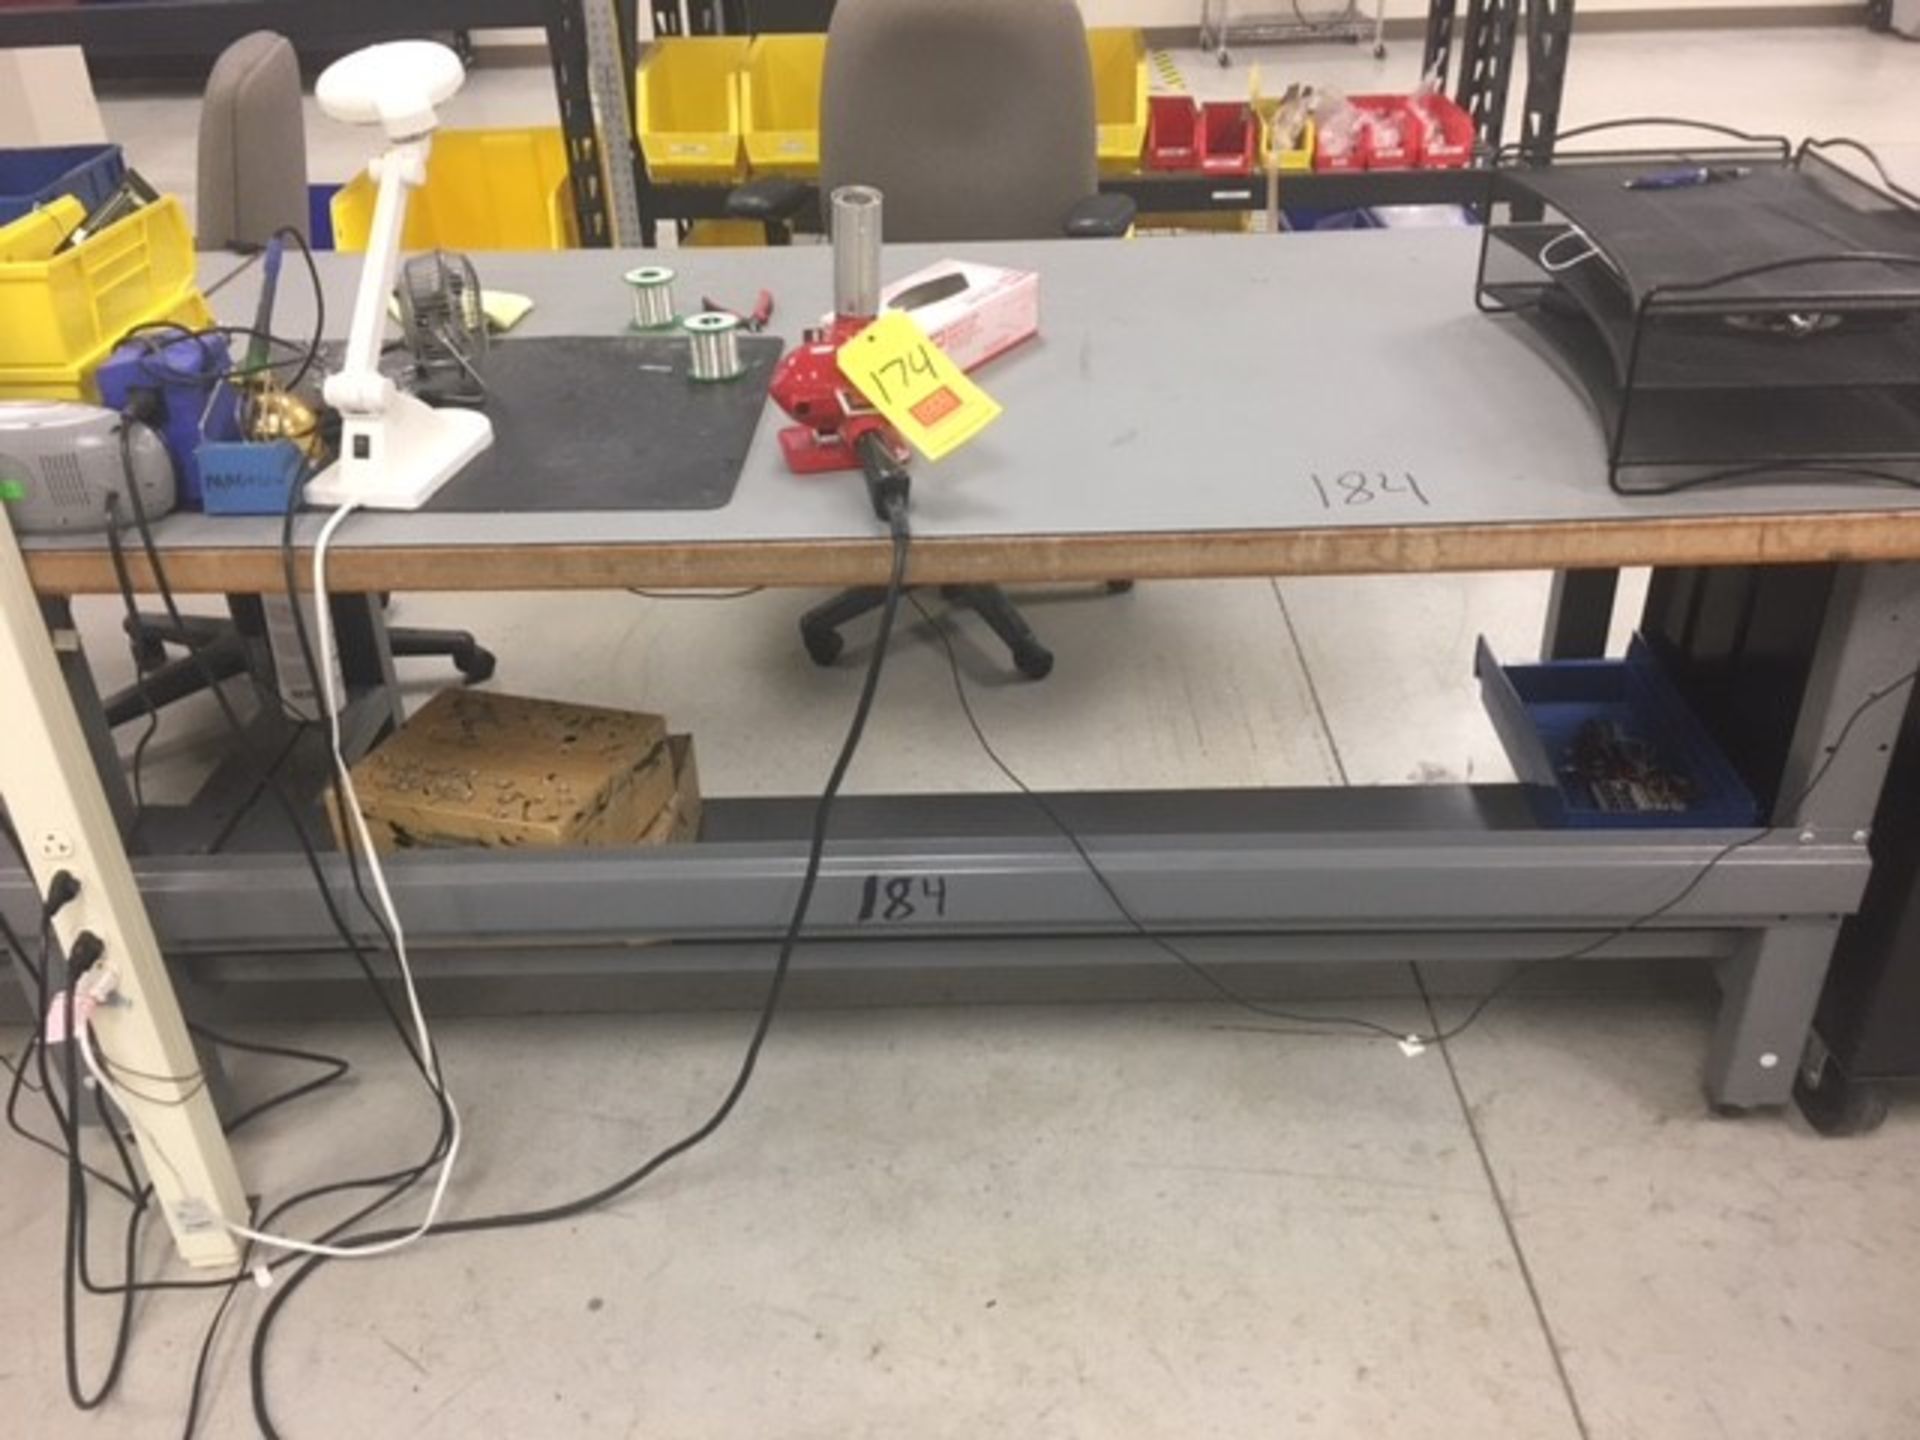 Table with Rubber Cover Rigging: $25